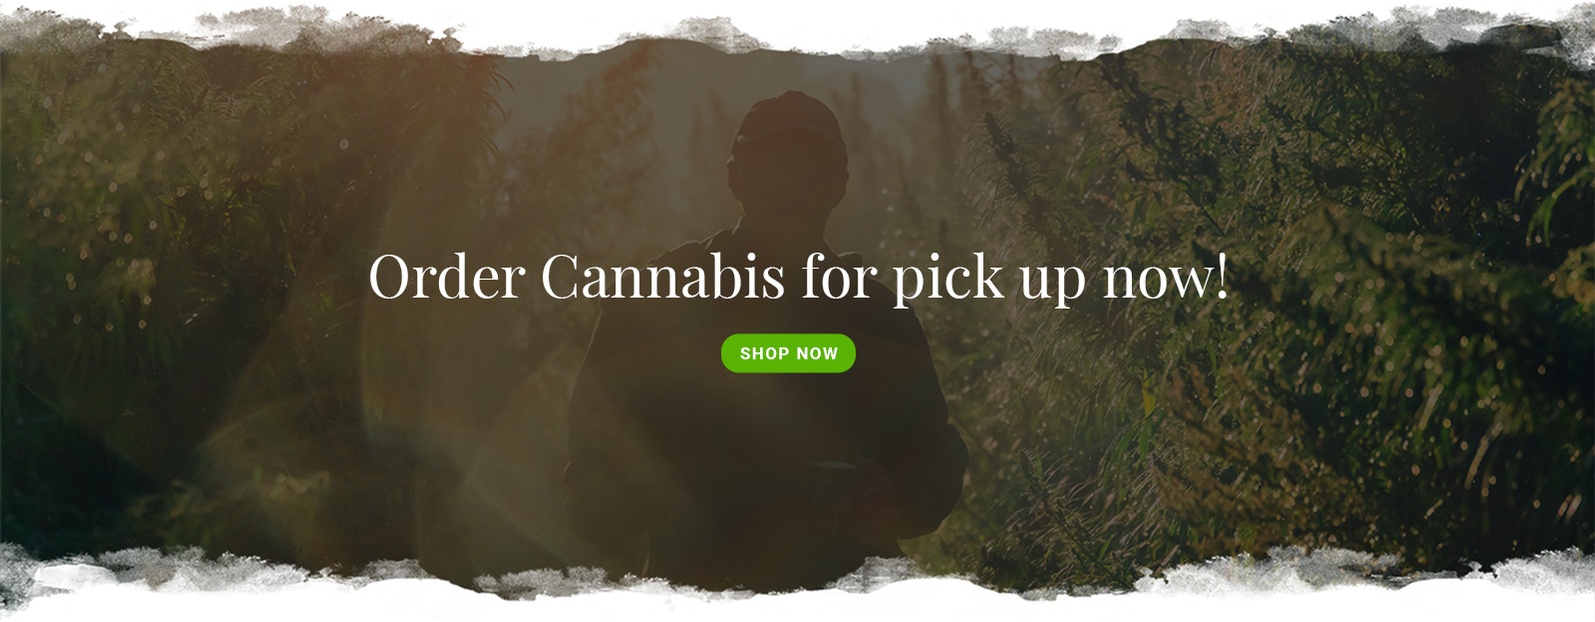 Order Cannabis for pick up now - Weed Store in Grande Prairie AB